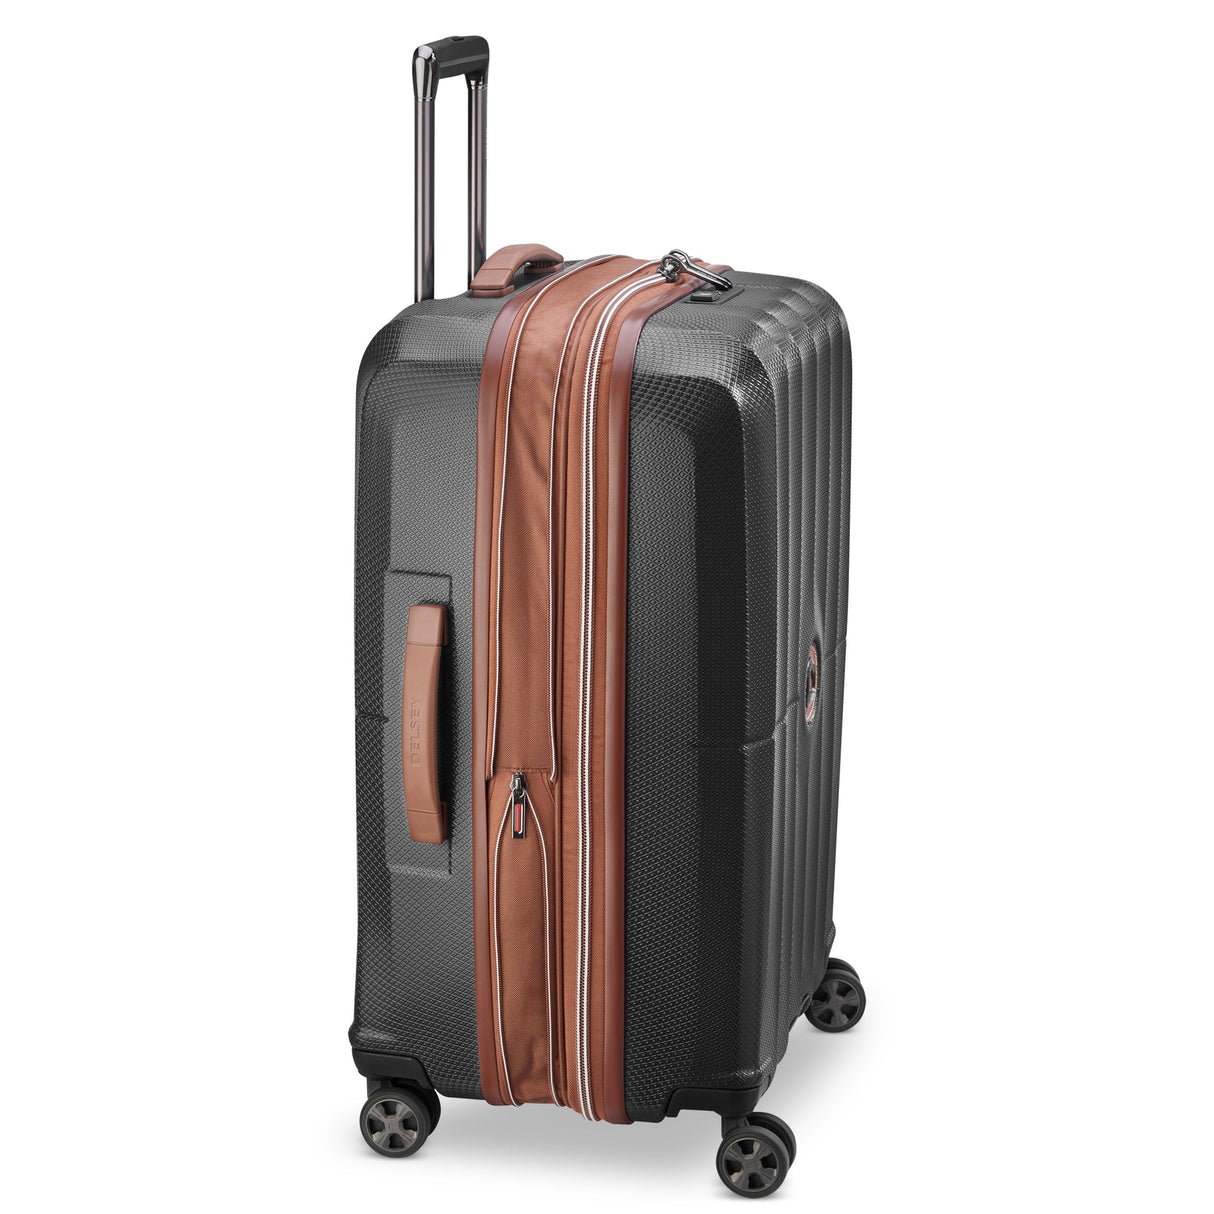 Delsey St Tropez Large Checked Expandable Spinner , , delsey-st-tropez-40208783000-16_1800x1800_53072b05-3e15-431c-bc71-700814270a19